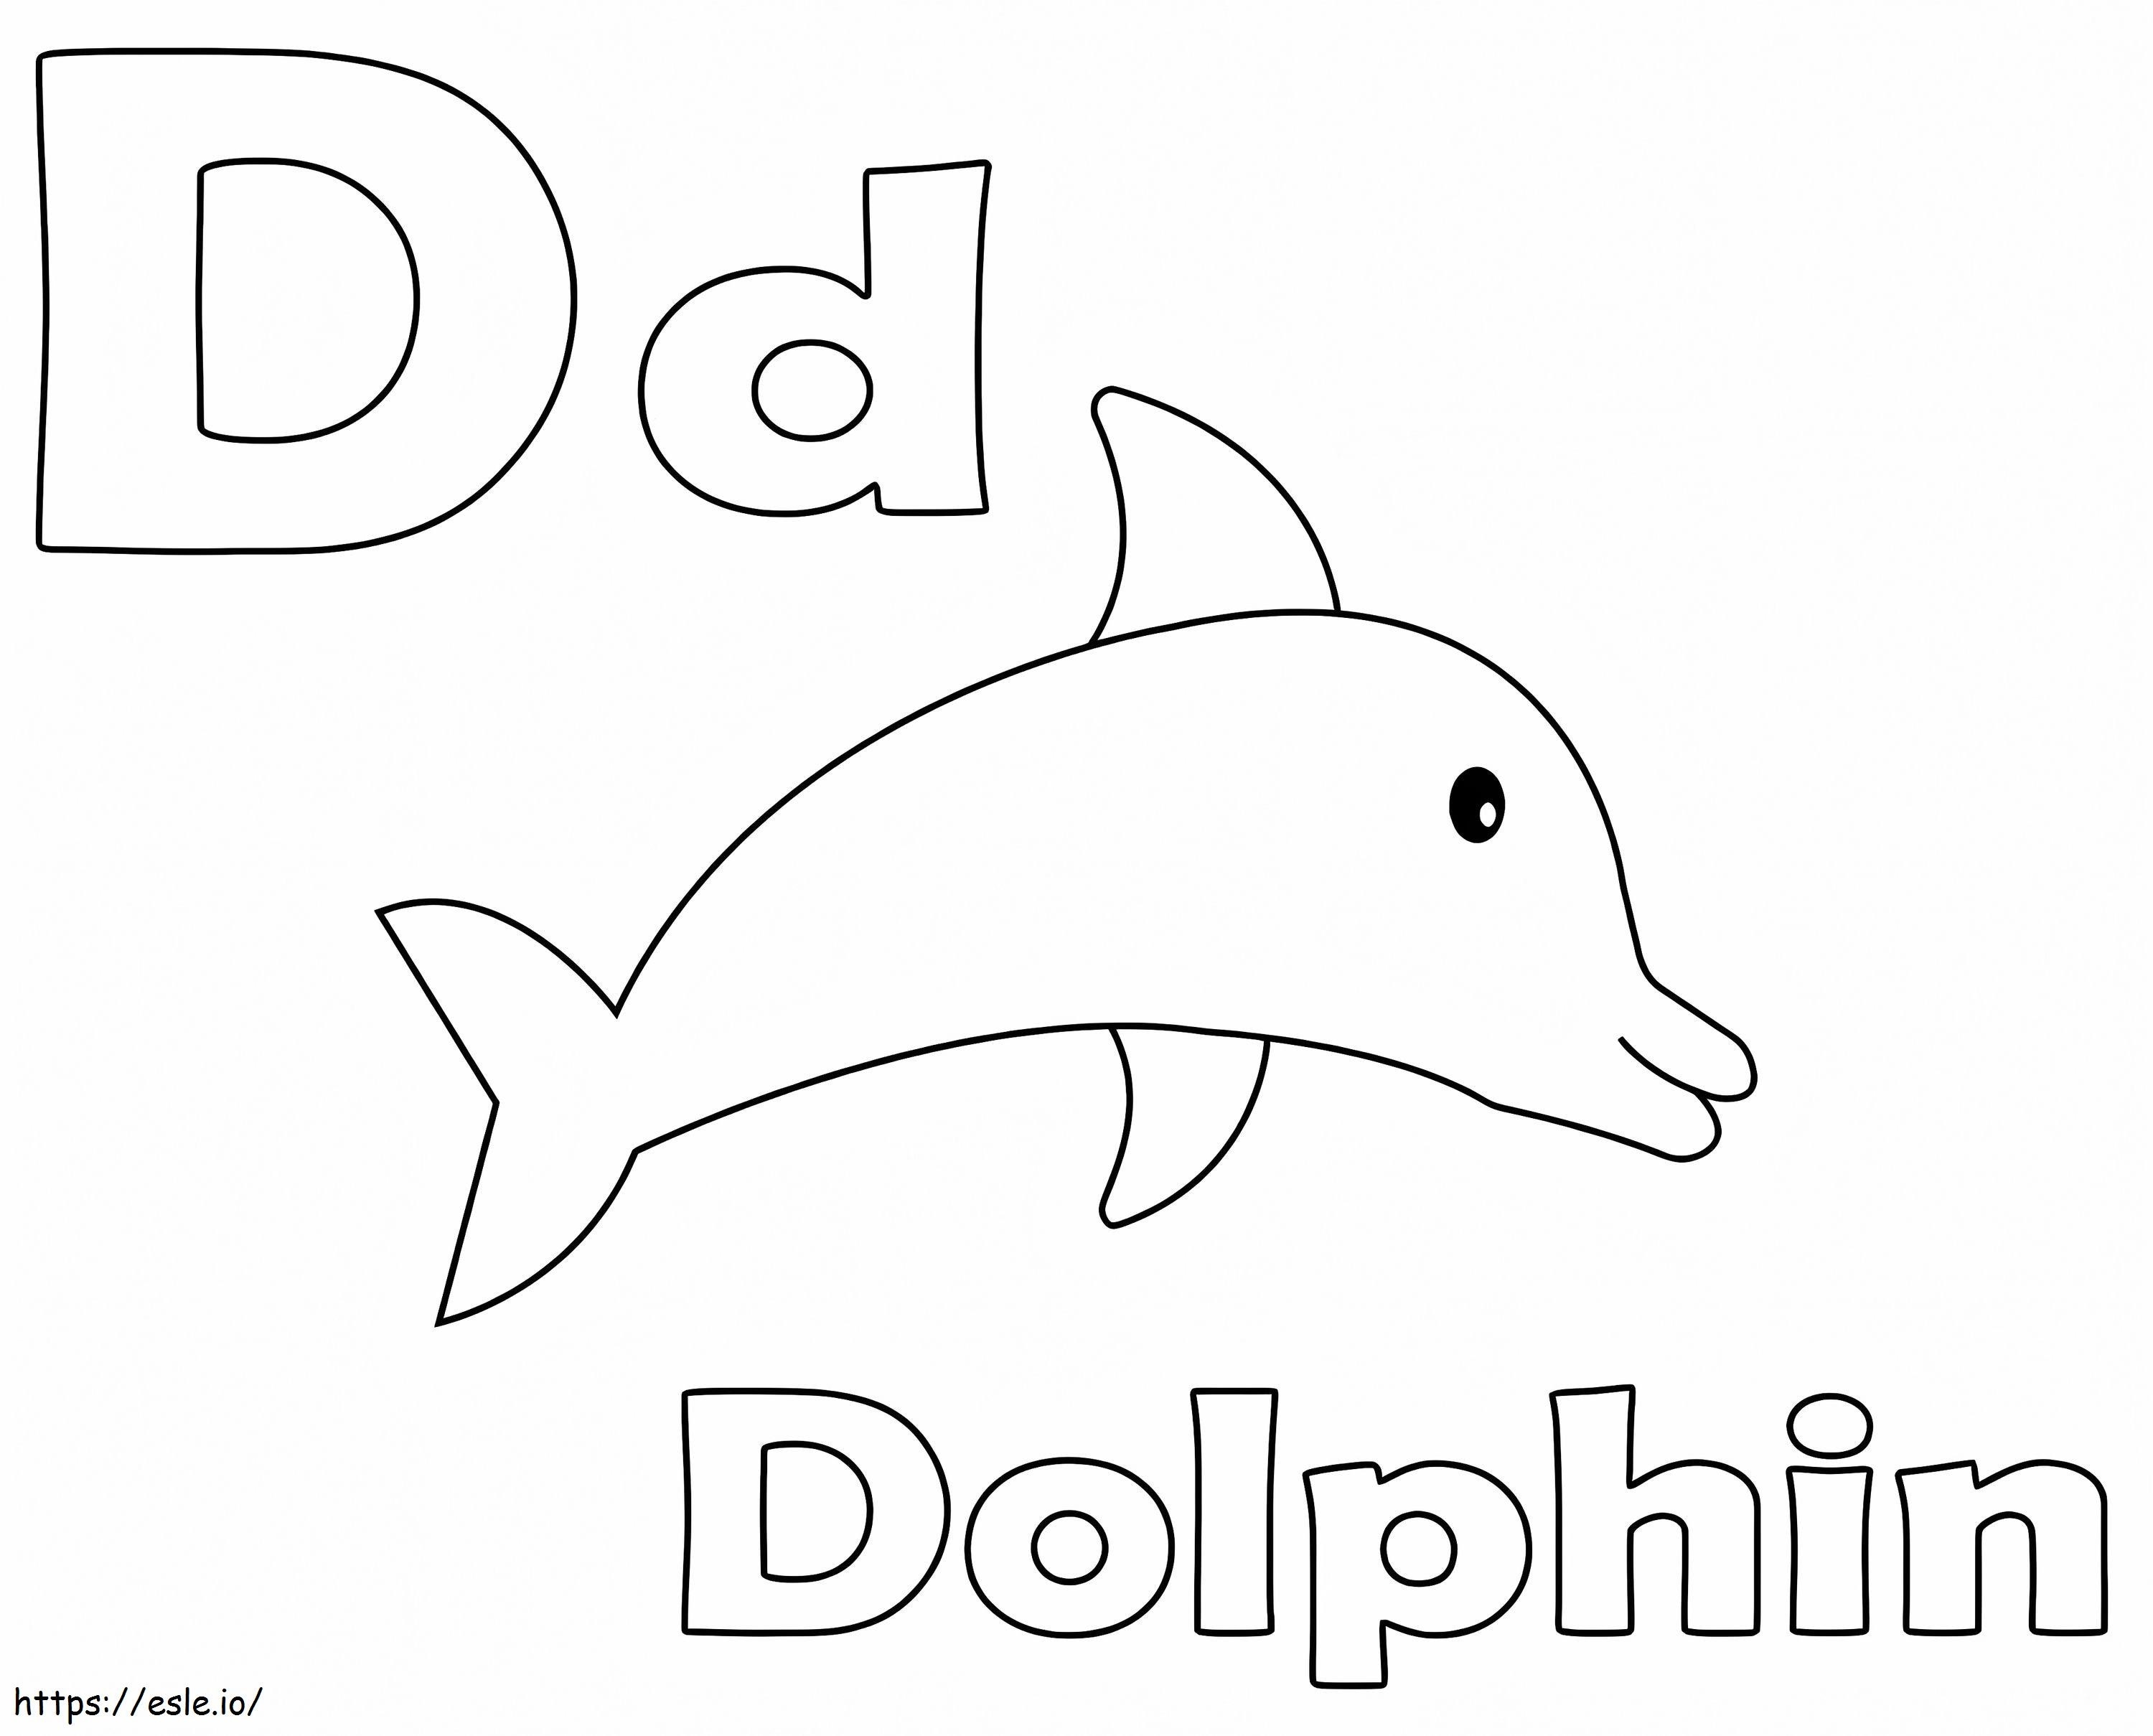 Dolphin Letter D coloring page